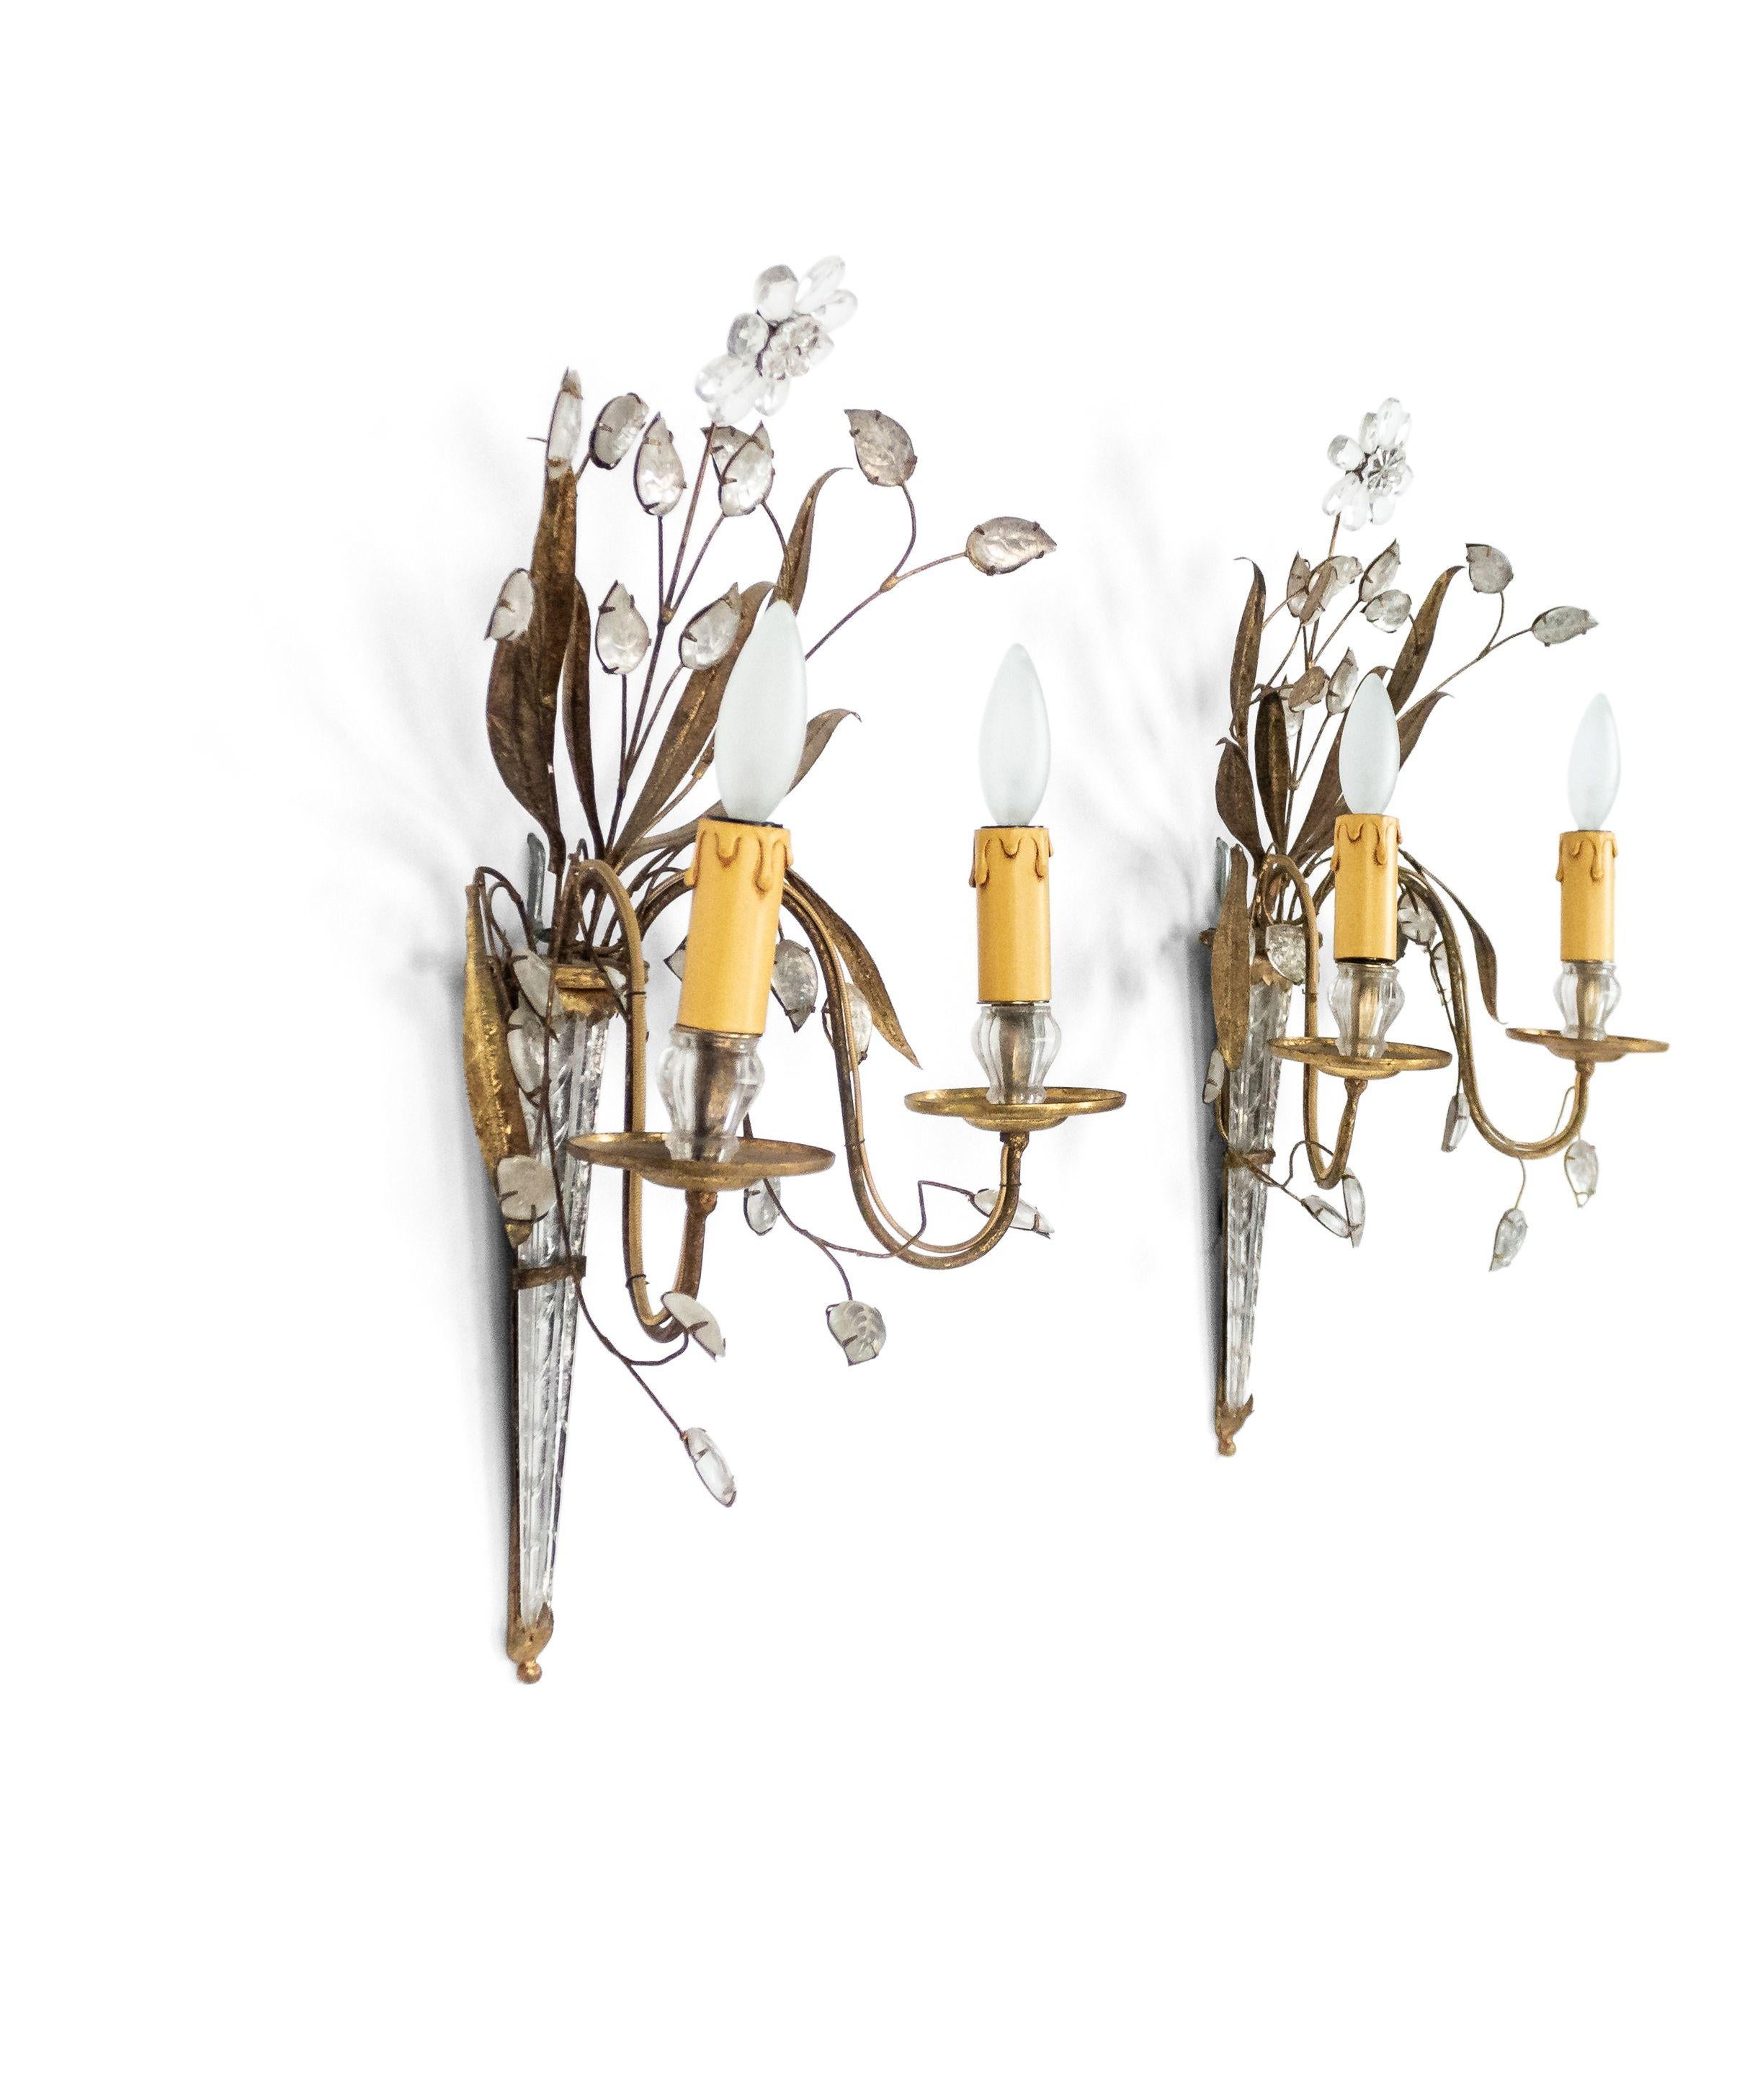 4 French Mid-Century (1940's) glass & gilt metal 2 arm wall sconces with flowering branches emanating from a tapered form back plate. (att: BAGUES) (PRICED EACH)
